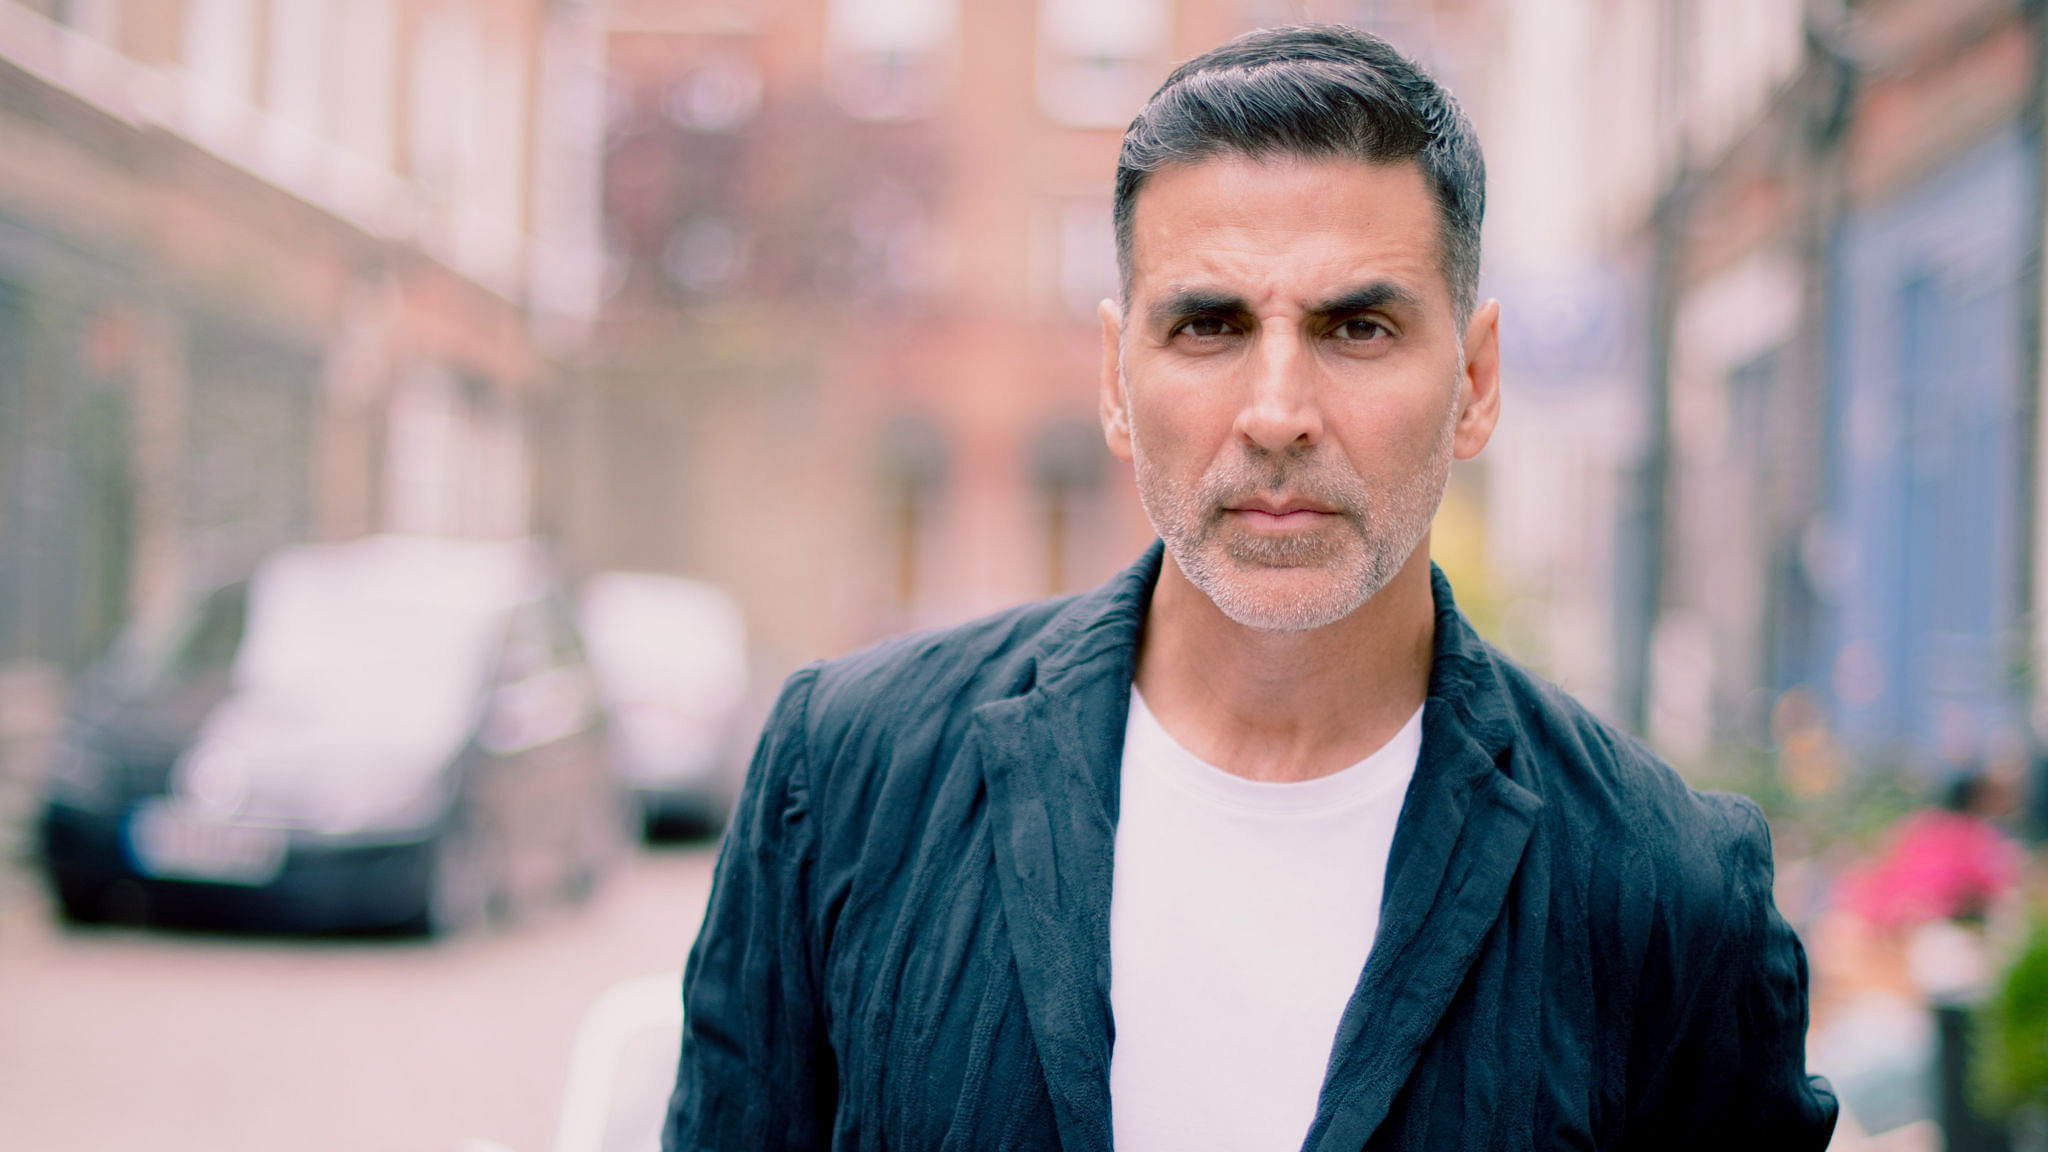 Punjabi charm in Canada could lead to make Akshay a PM